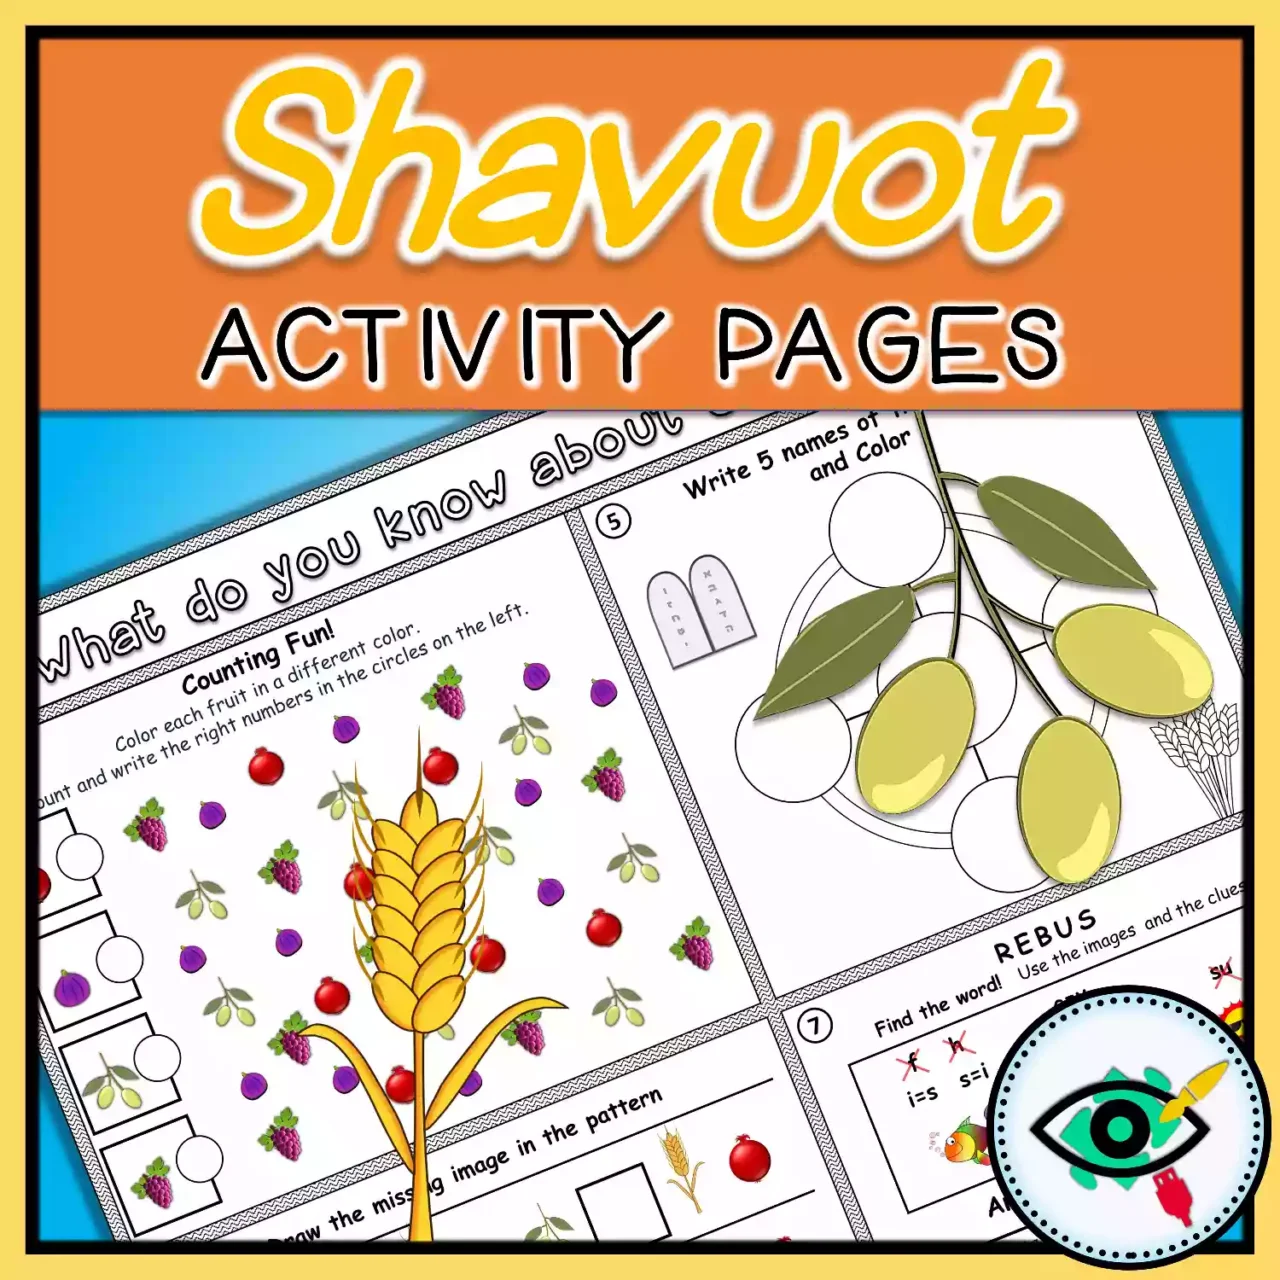 Shavuot Activity Pages for Kids - Featured 1 | Planerium